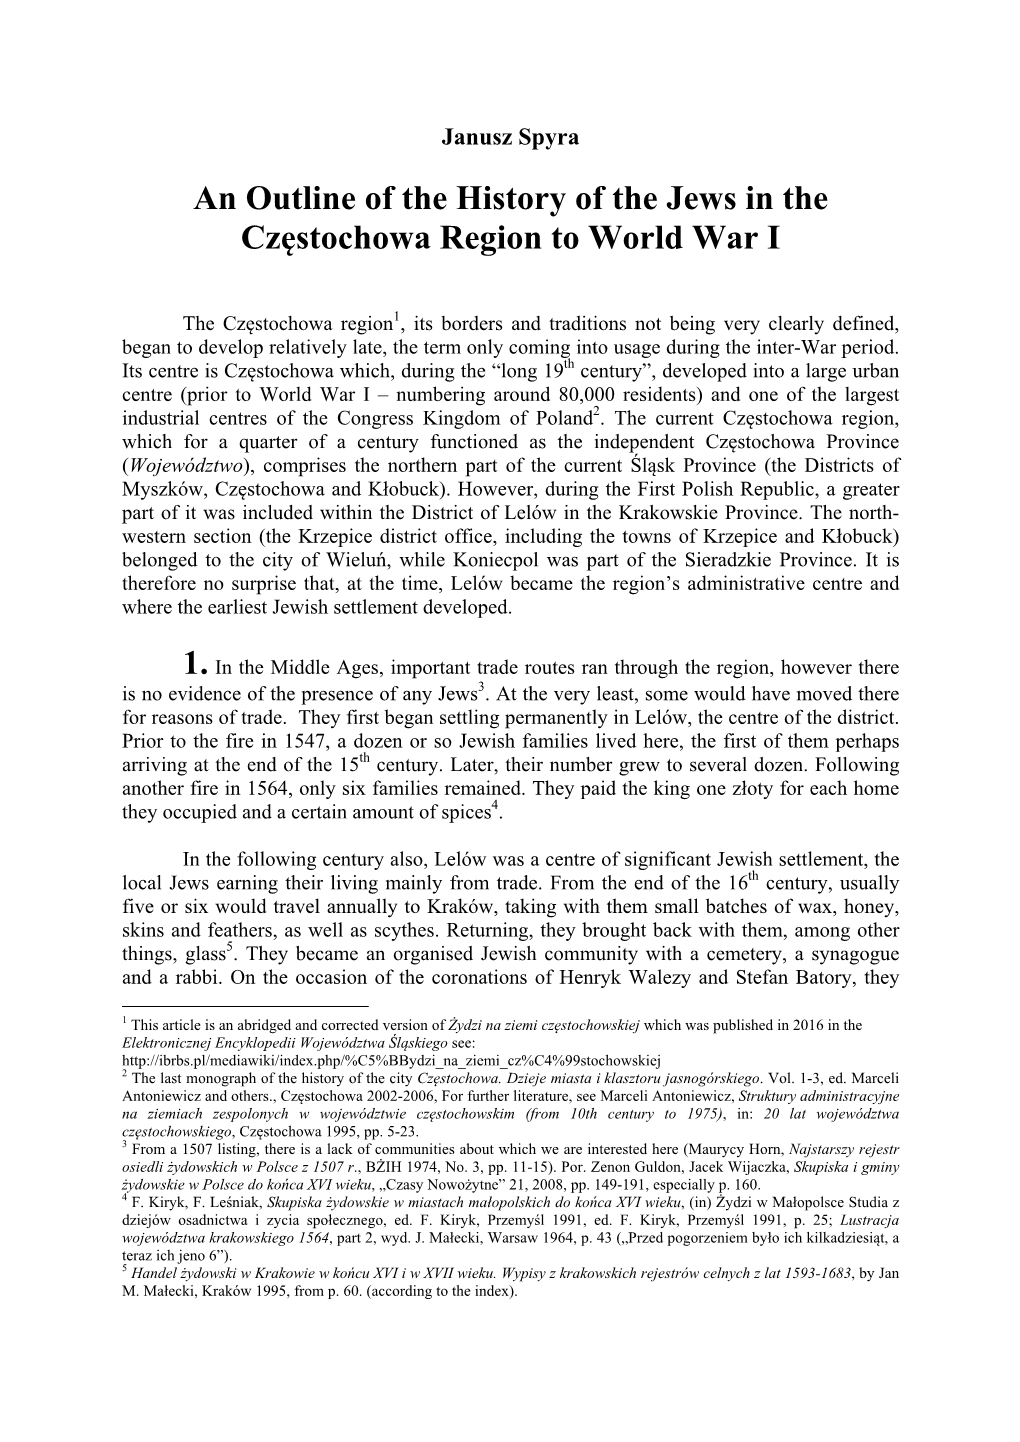 An Outline of the History of the Jews in the Częstochowa Region to World War I